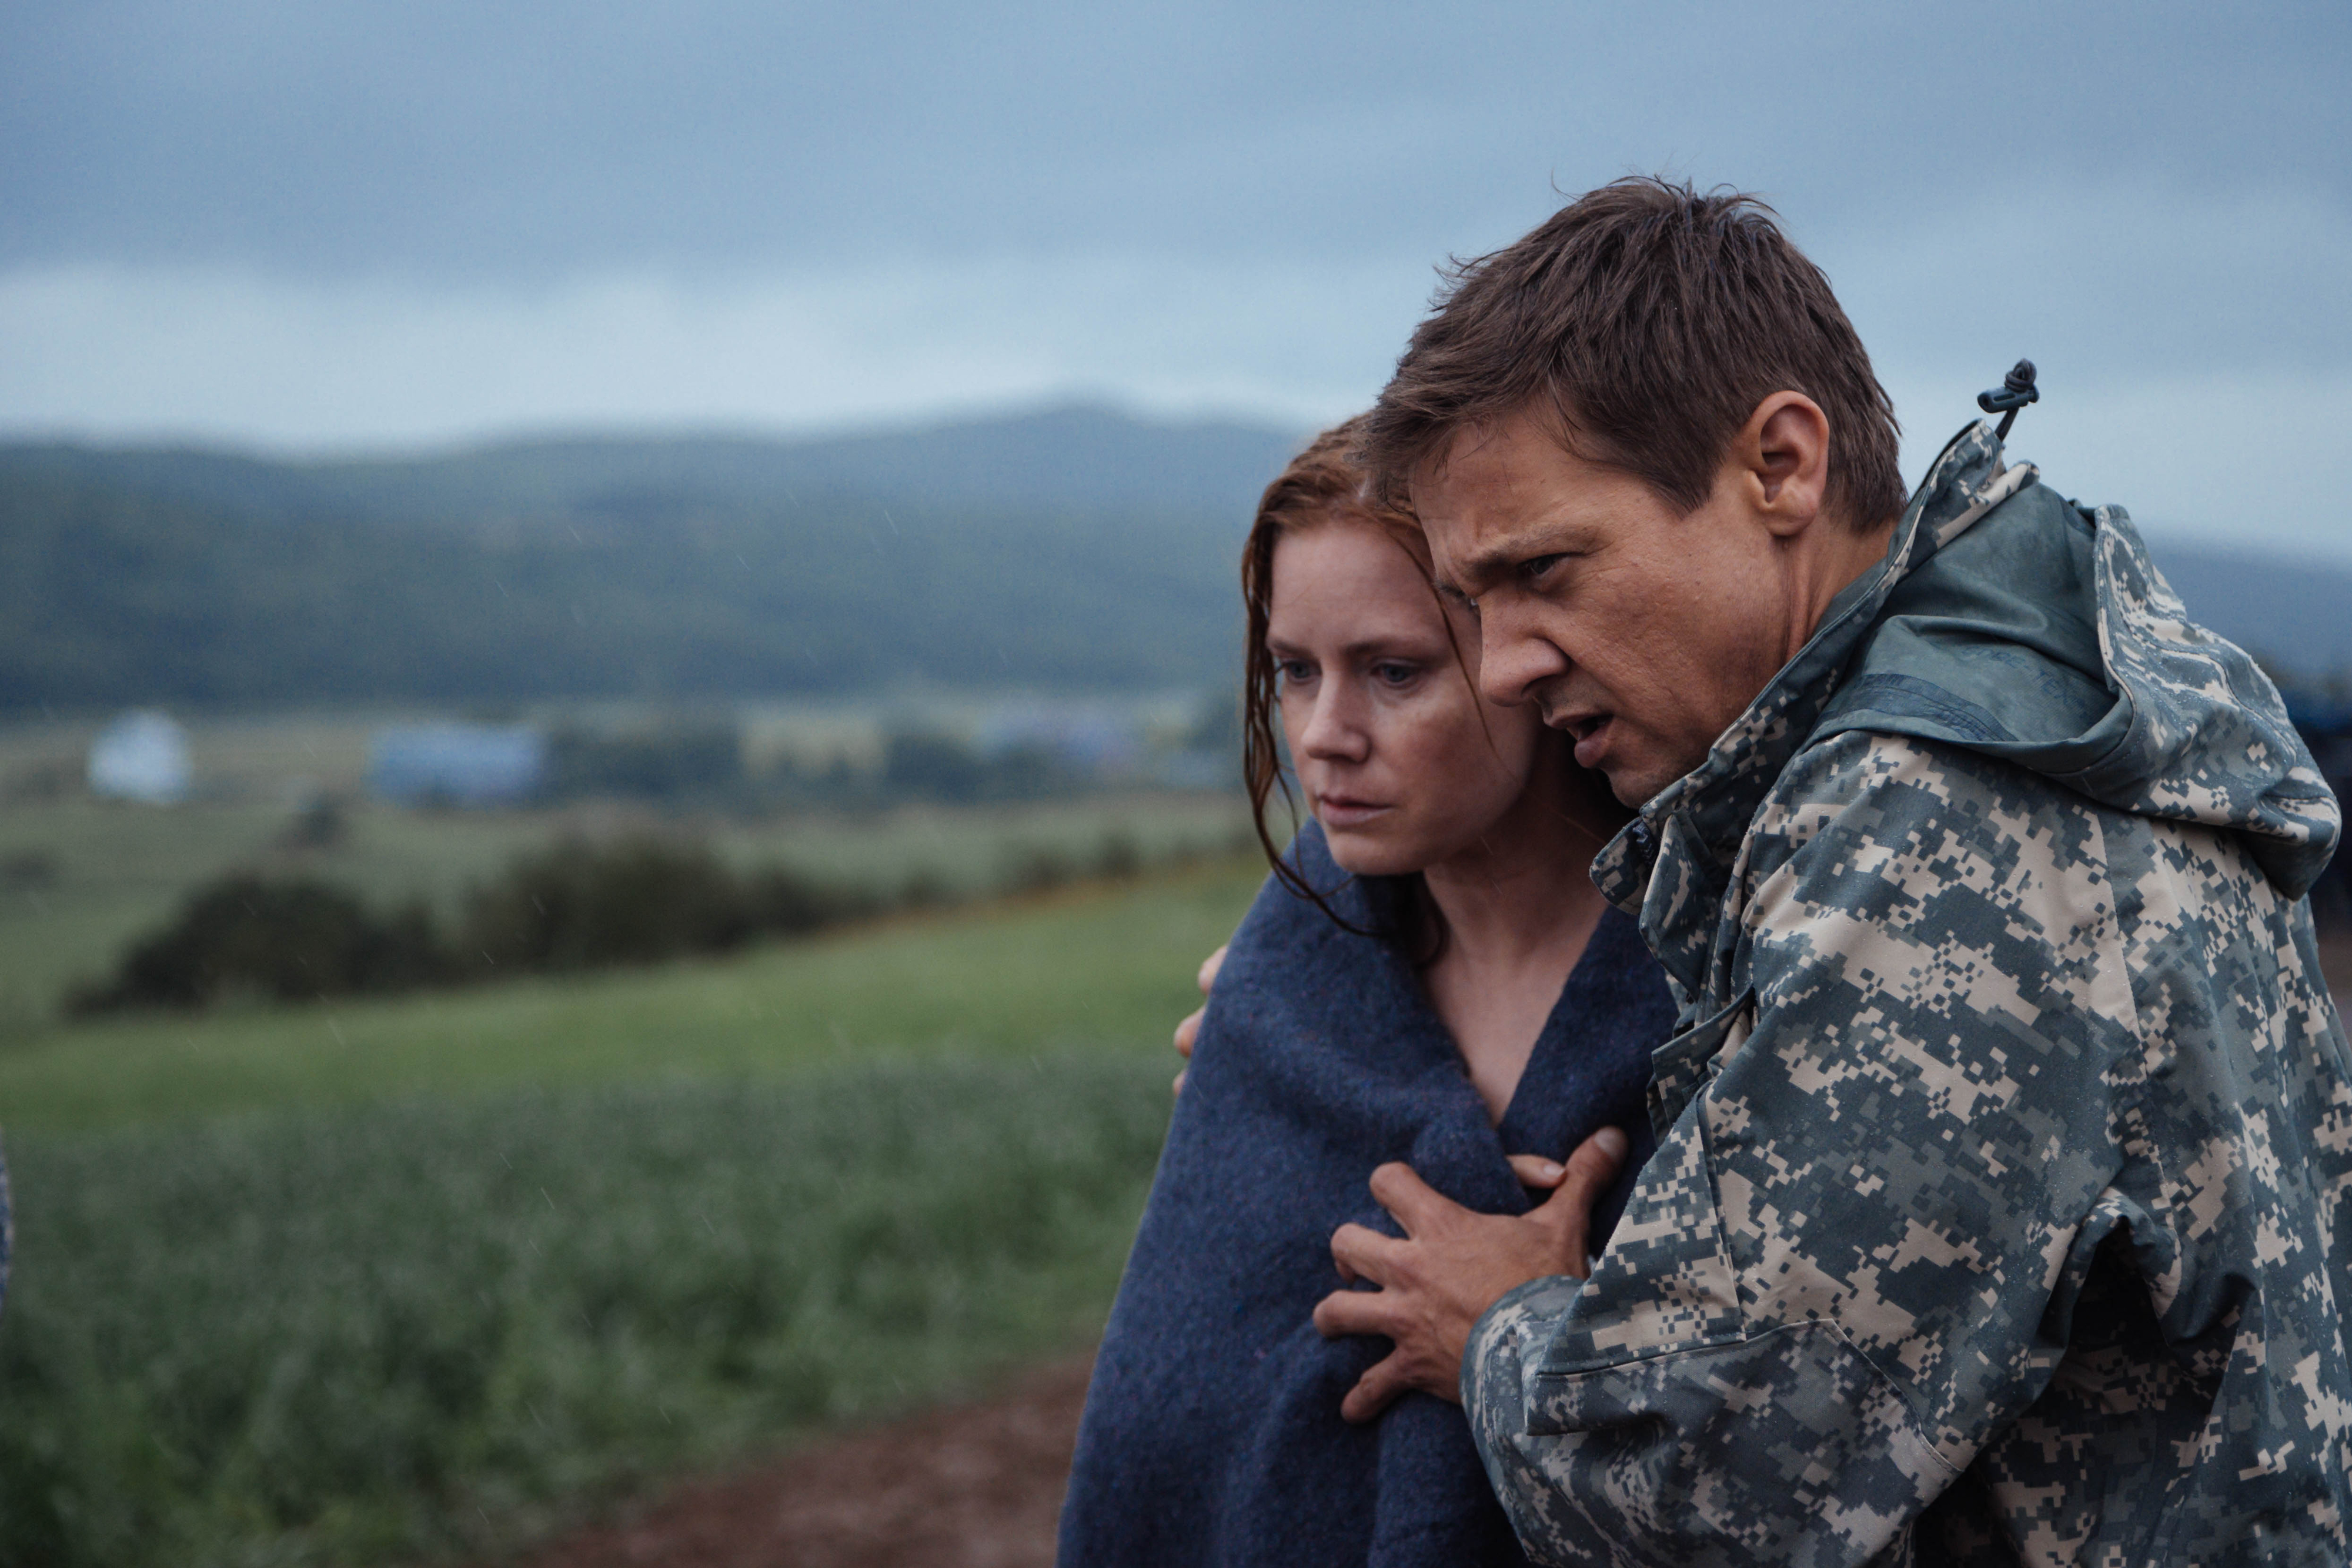 Arrival, Jeremy Renner and Amy Adams